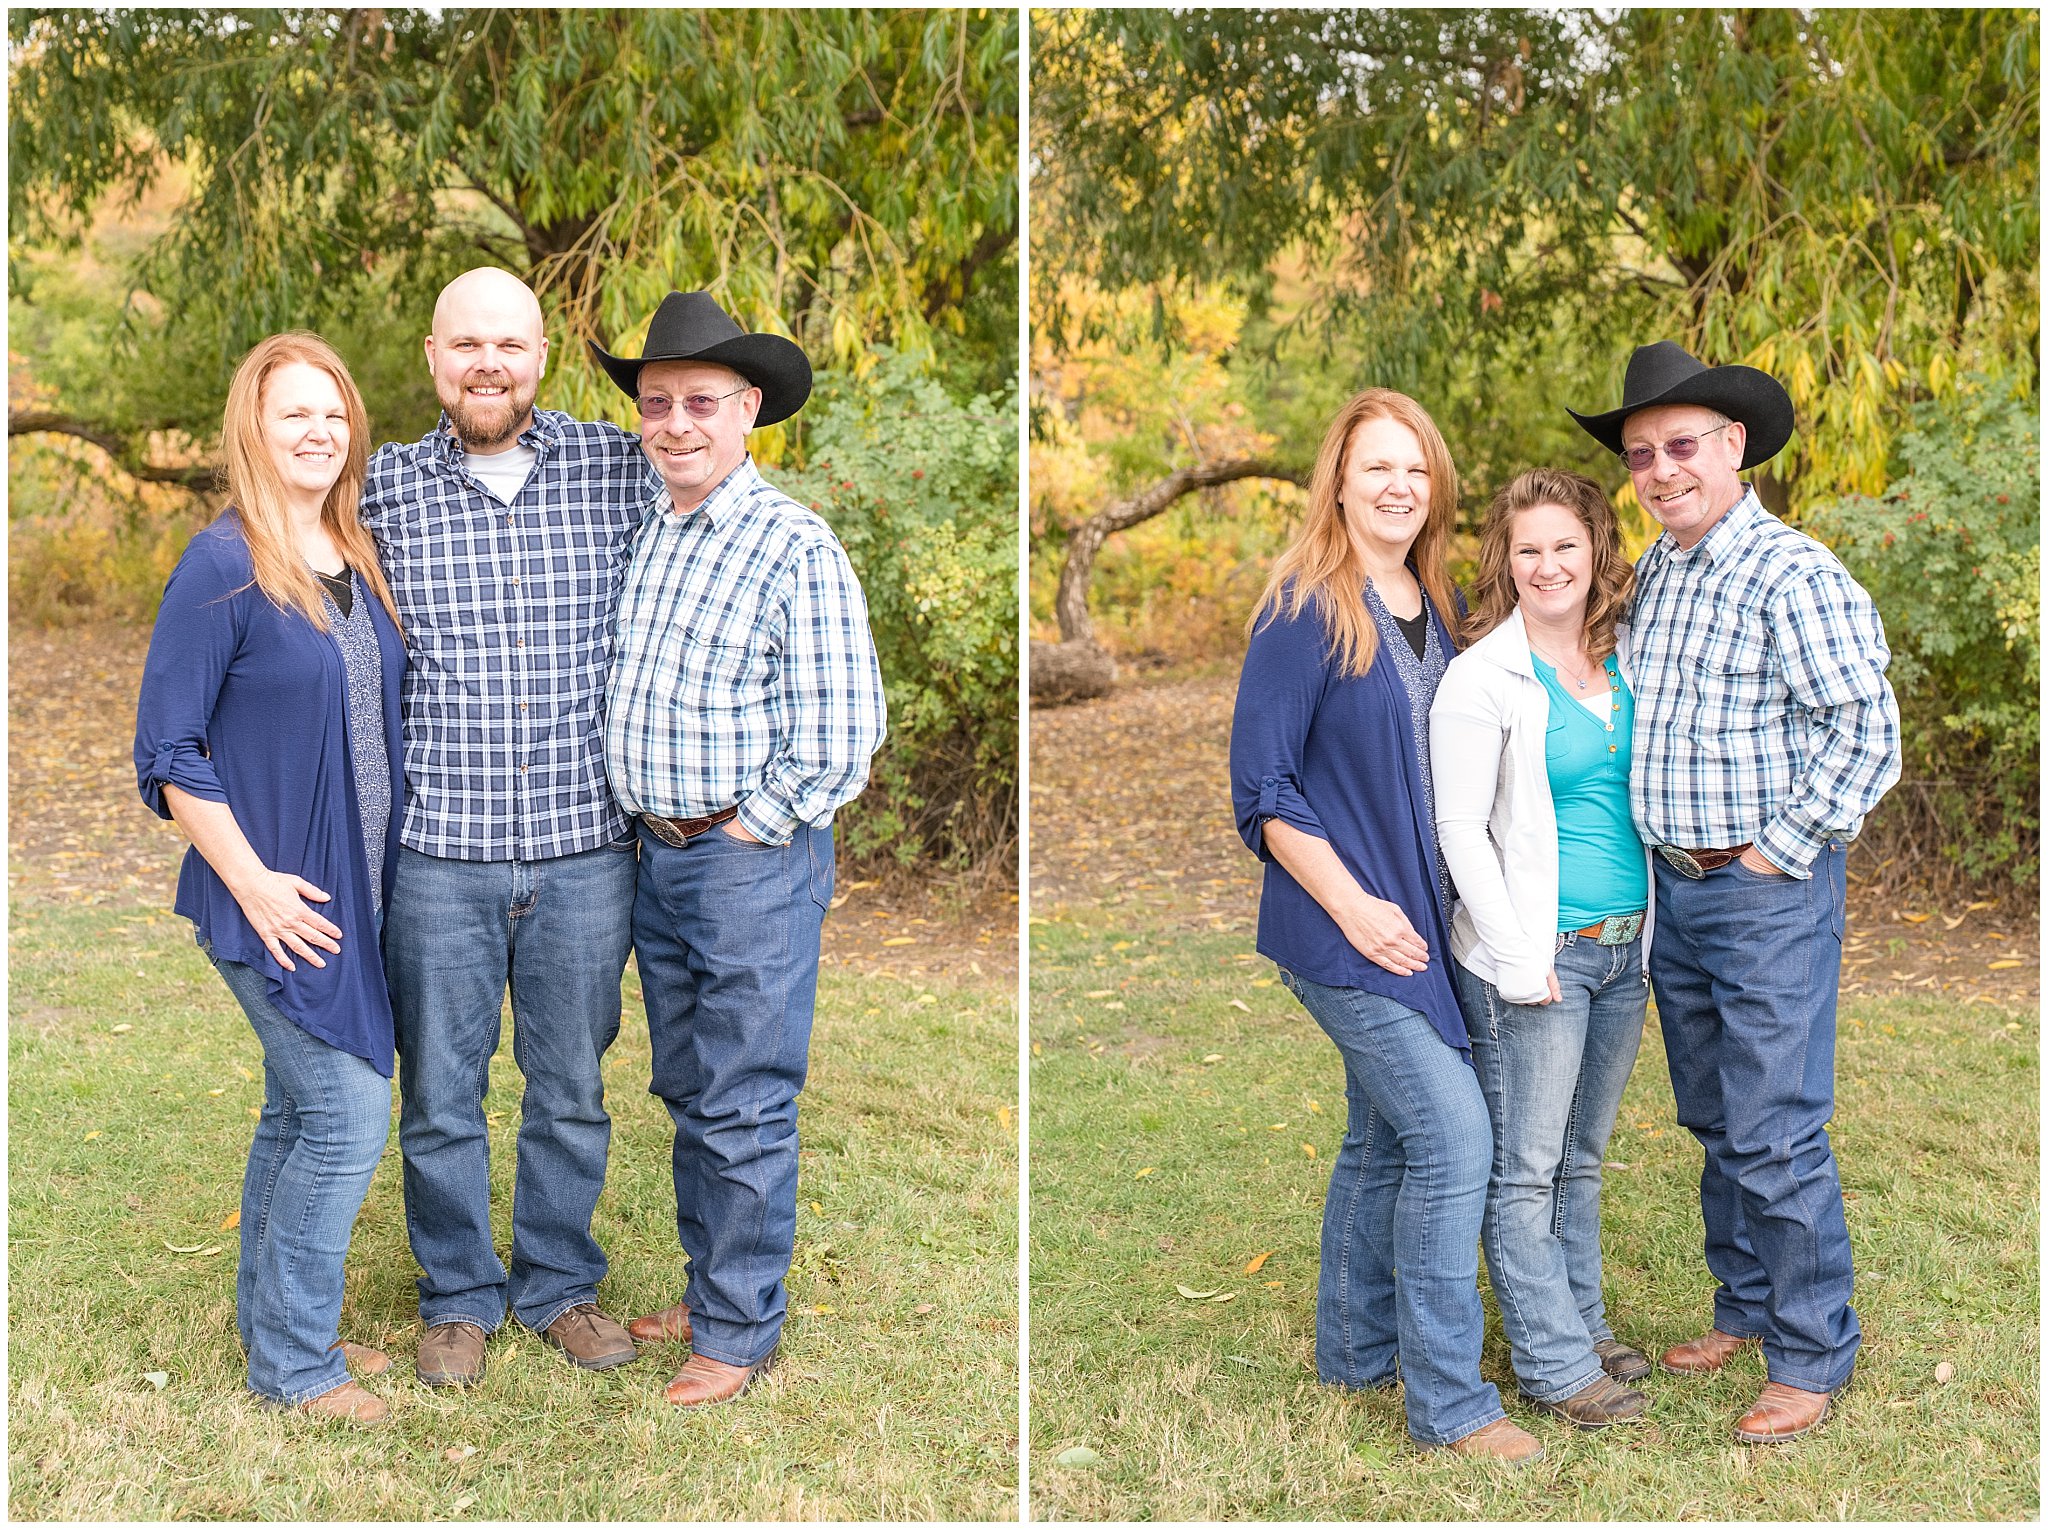 Adult children with their parents | Tremonton Family Pictures and Make a Wish Event | Jessie and Dallin Photography